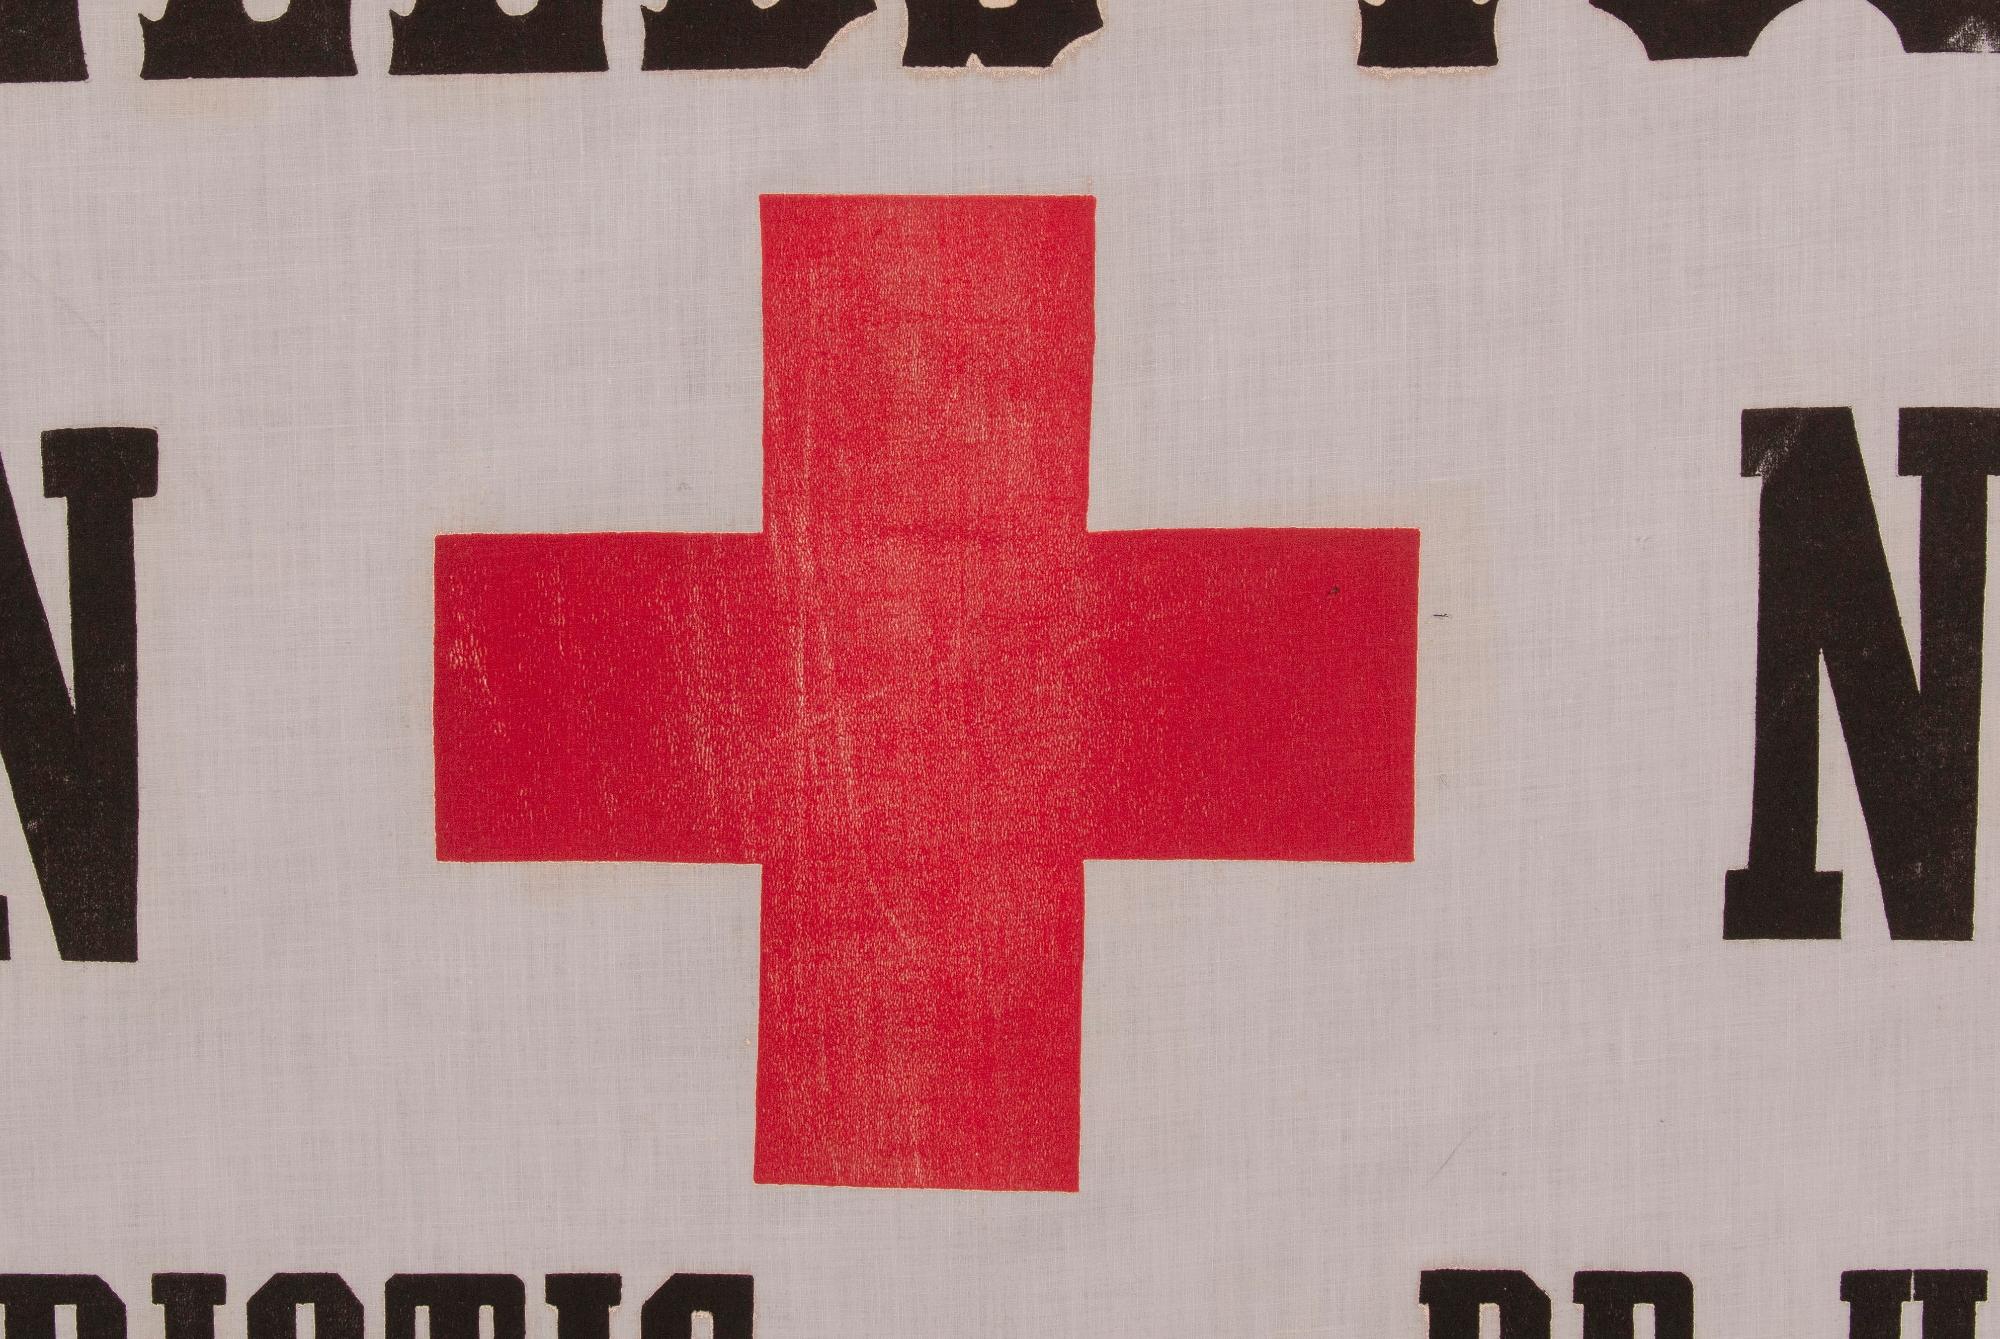 EXCEPTIONAL RED CROSS BANNER WITH WHIMSICAL LETTERING AND A TERRIFIC SLOGAN, WWI (U.S. INVOLVEMENT 1917-18), ONE OF APPROXIMATELY THREE EXAMPLES PRESENTLY IDENTIFIED


EXCEPTIONAL RED CROSS BANNER WITH WHIMSICAL LETTERING AND A TERRIFIC SLOGAN, WWI